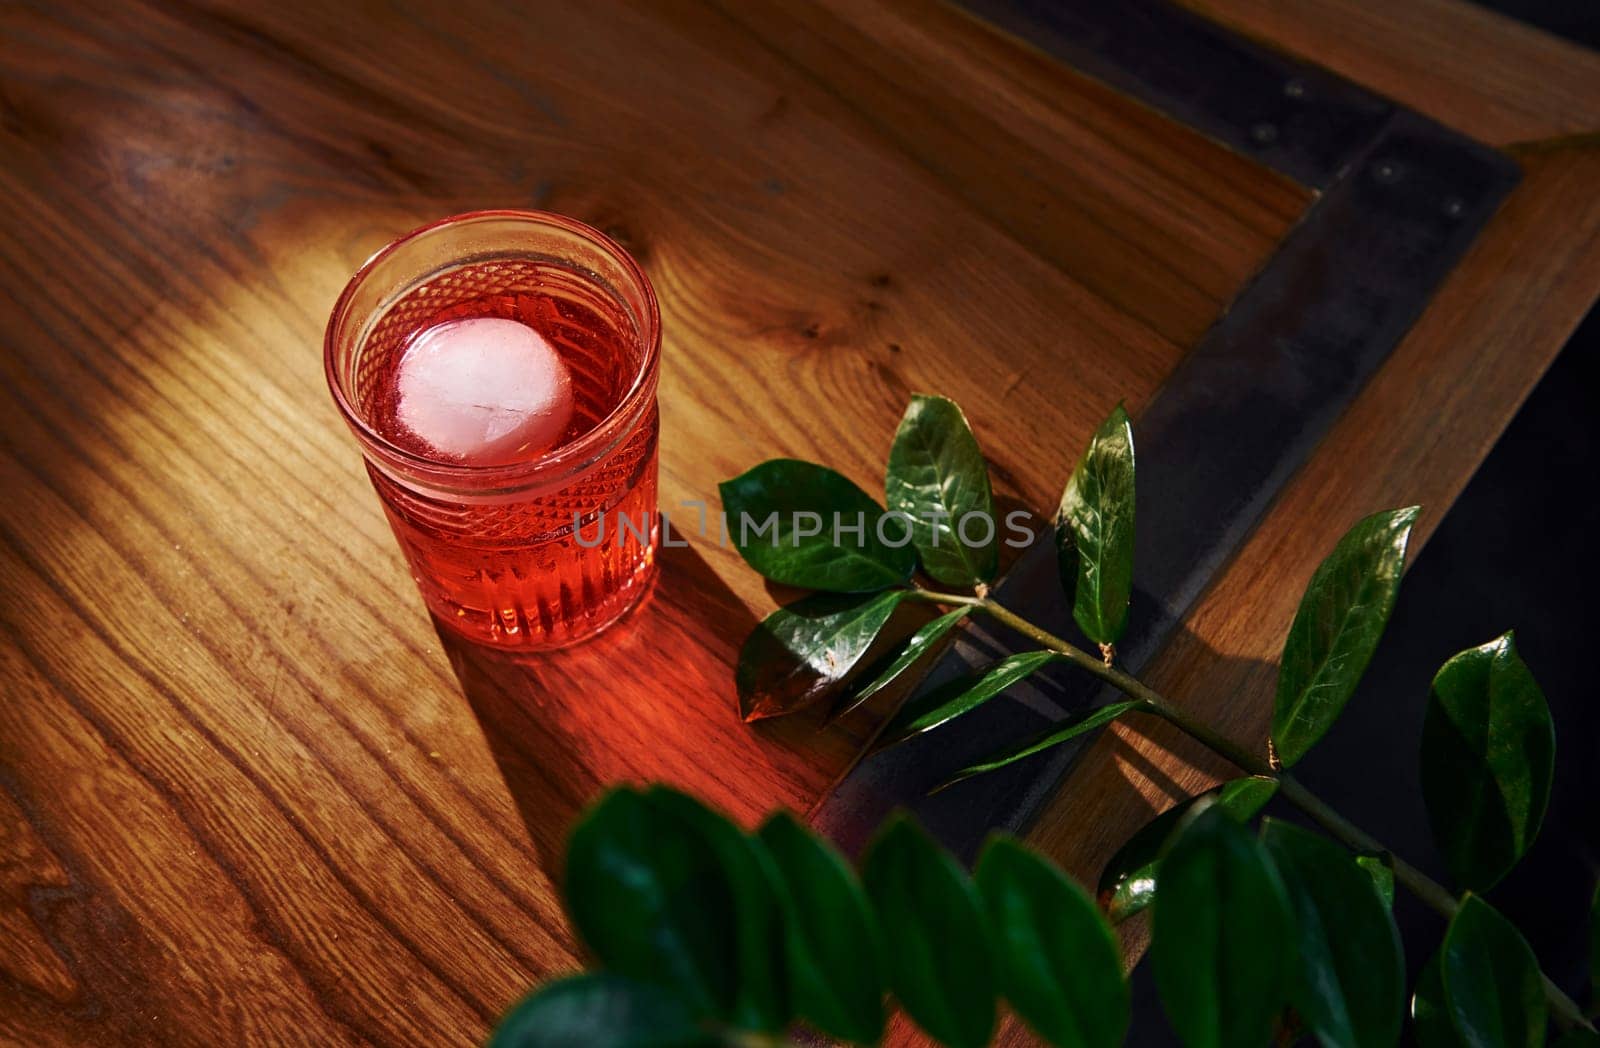 Close up view of fresh summer cocktail on the wooden table.